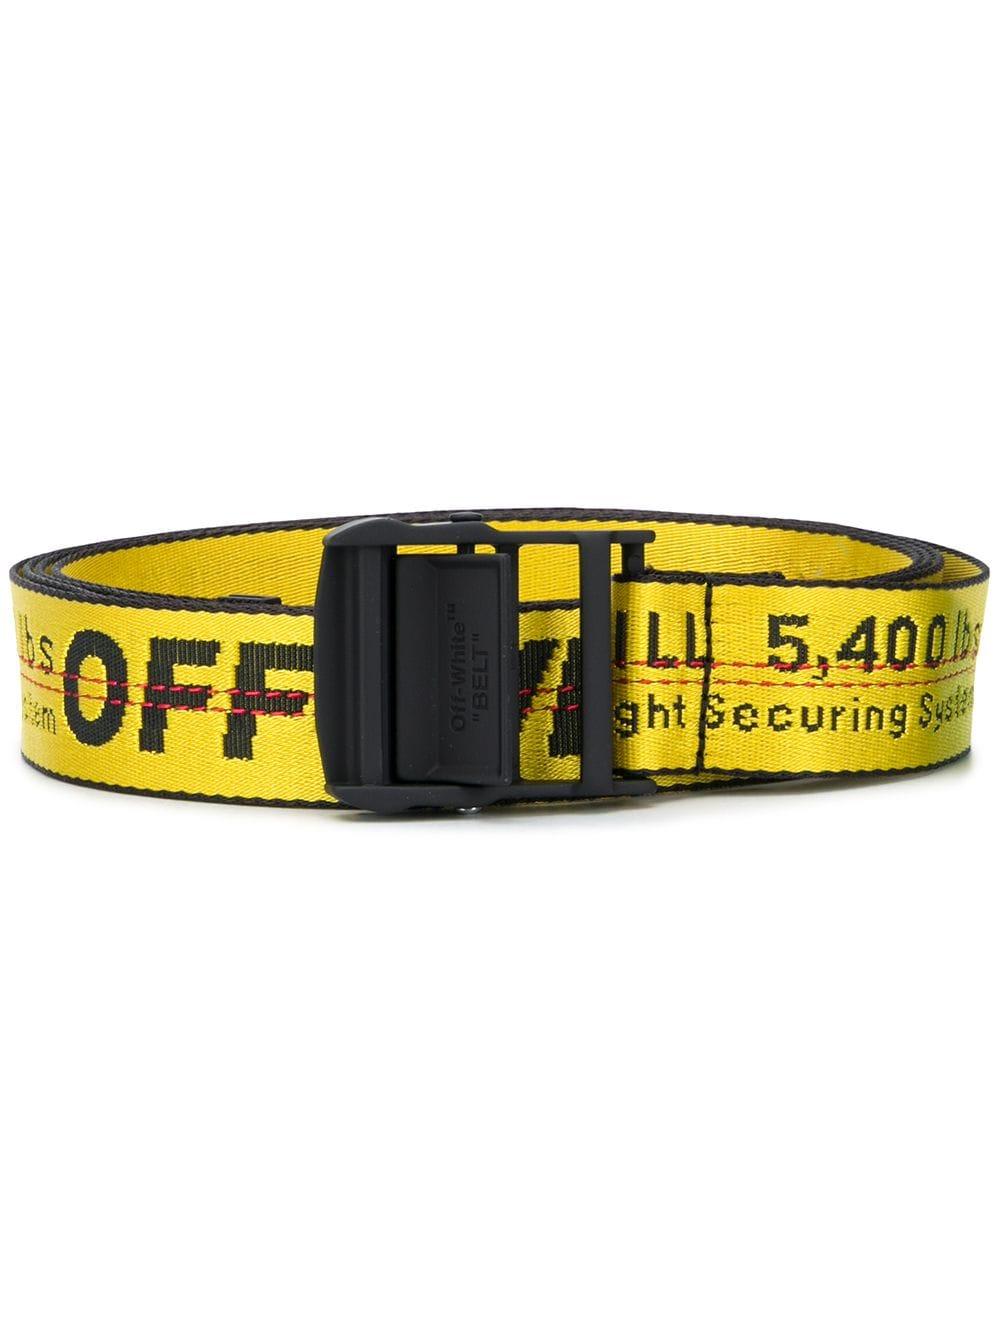 Mainstream Stå op i stedet Telemacos Off-White c/o Virgil Abloh Industrial Belt in Yellow Black (Yellow) for Men  - Save 65% - Lyst